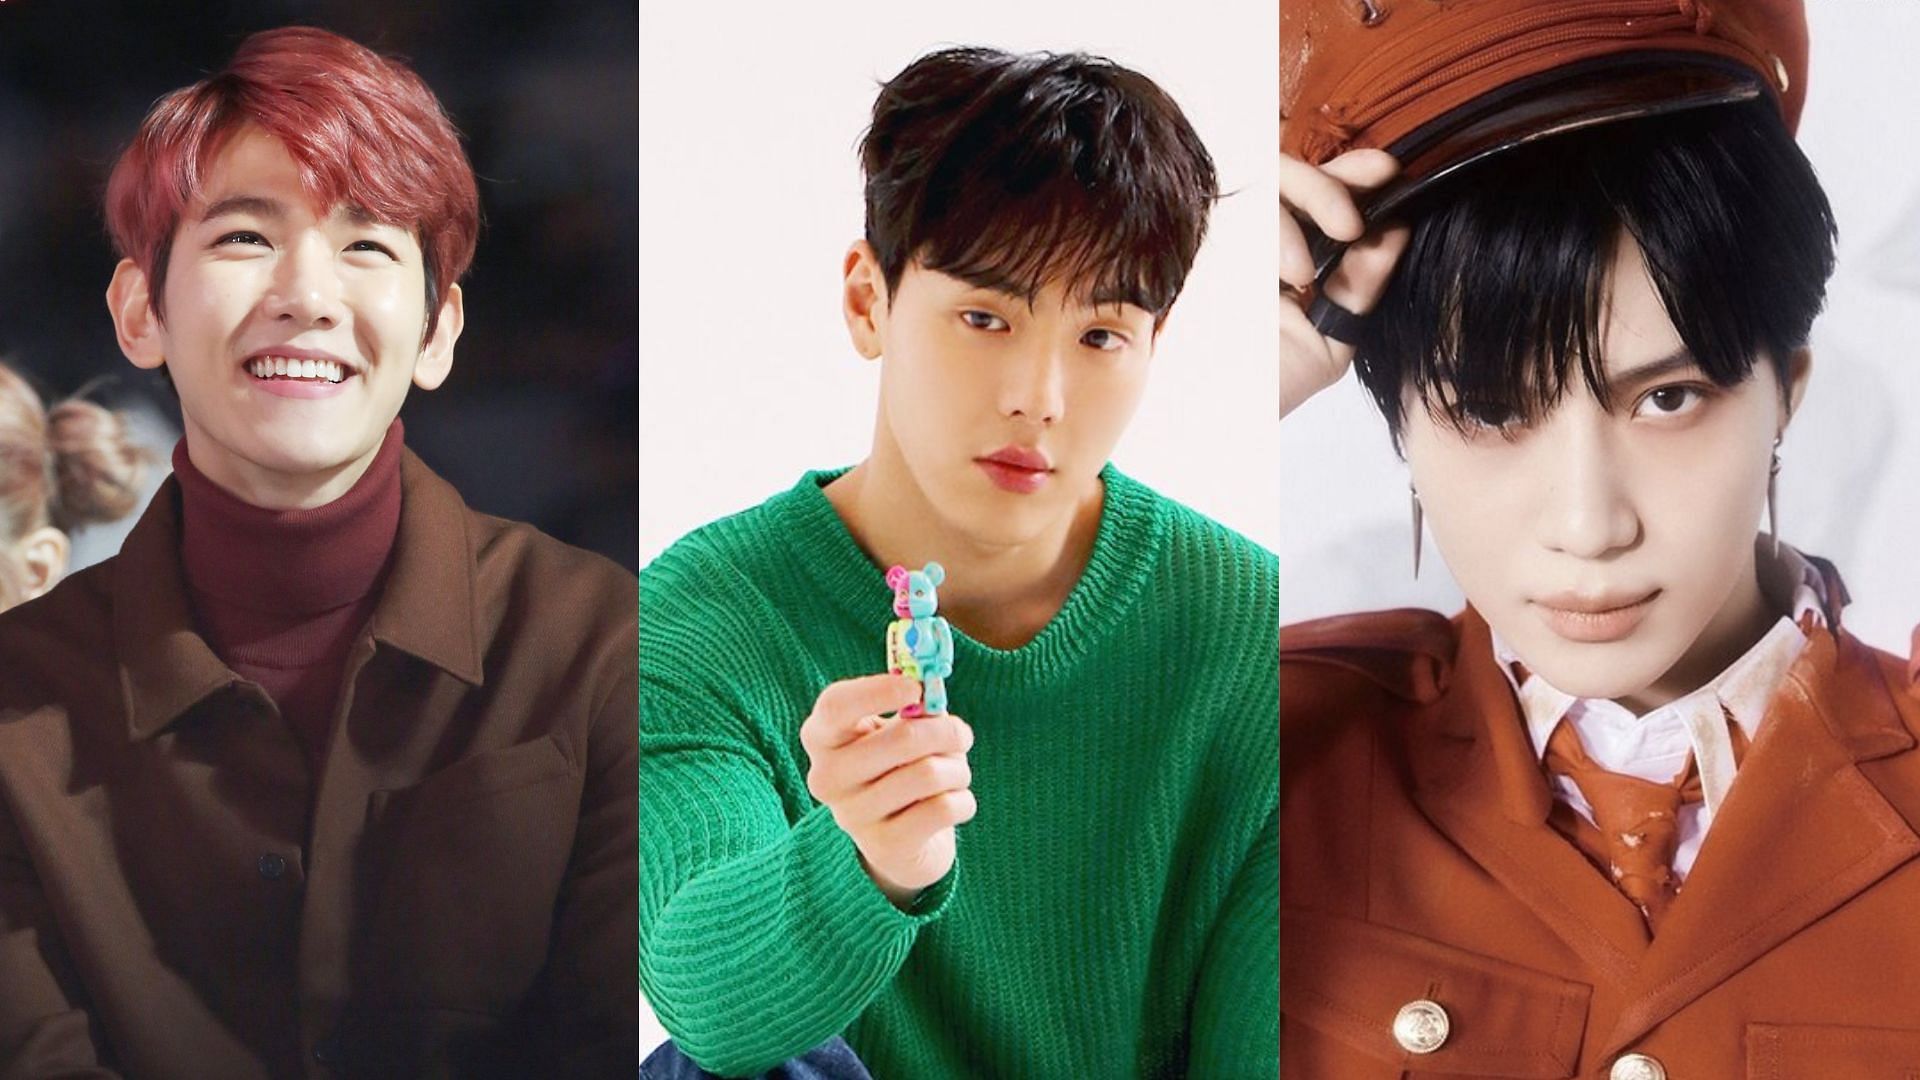 These K-pop idols will be discharged by the end of 2023. (Images via Twitter/ @baekexoist, @margwonnie, and @sammy4263)